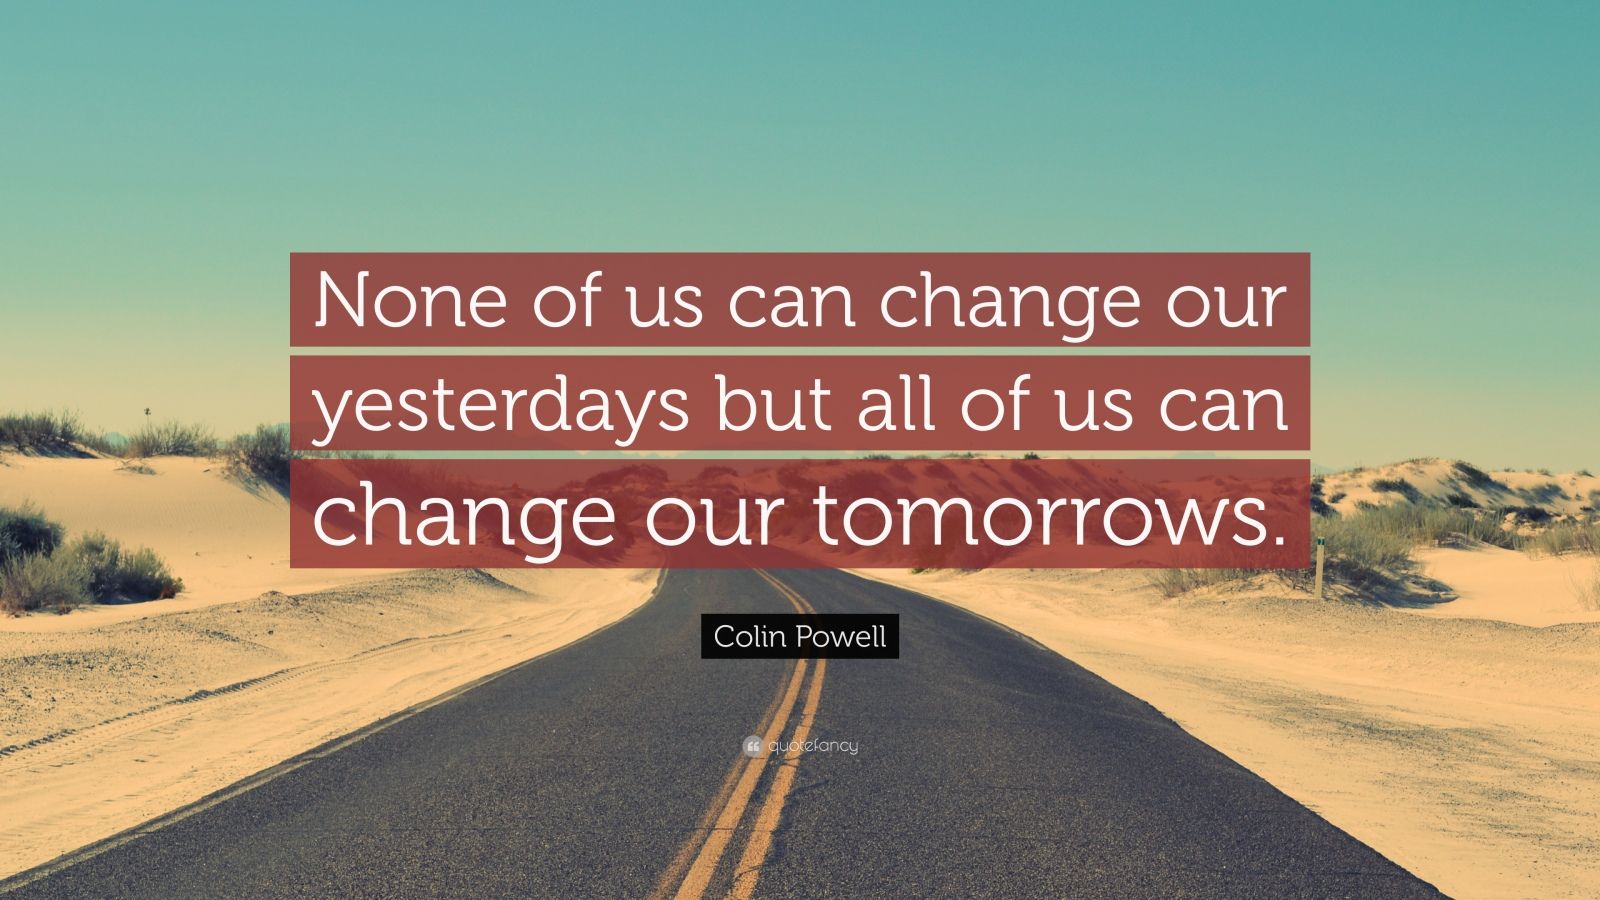 Colin Powell Quote: “None of us can change our yesterdays but all of us ...